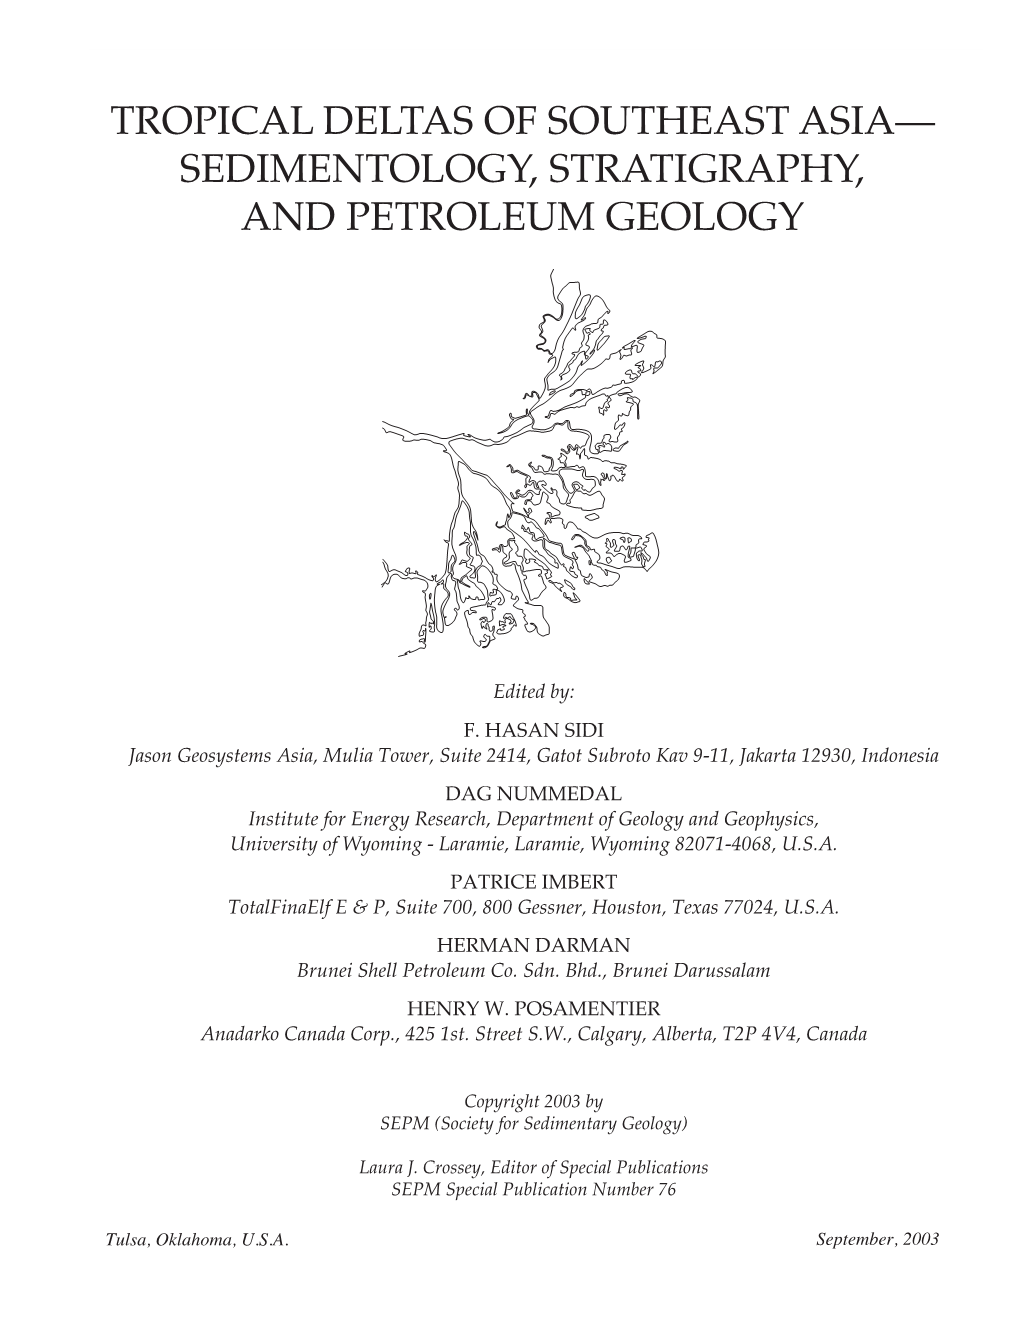 Tropical Deltas of Southeast Asia— Sedimentology, Stratigraphy, and Petroleum Geology